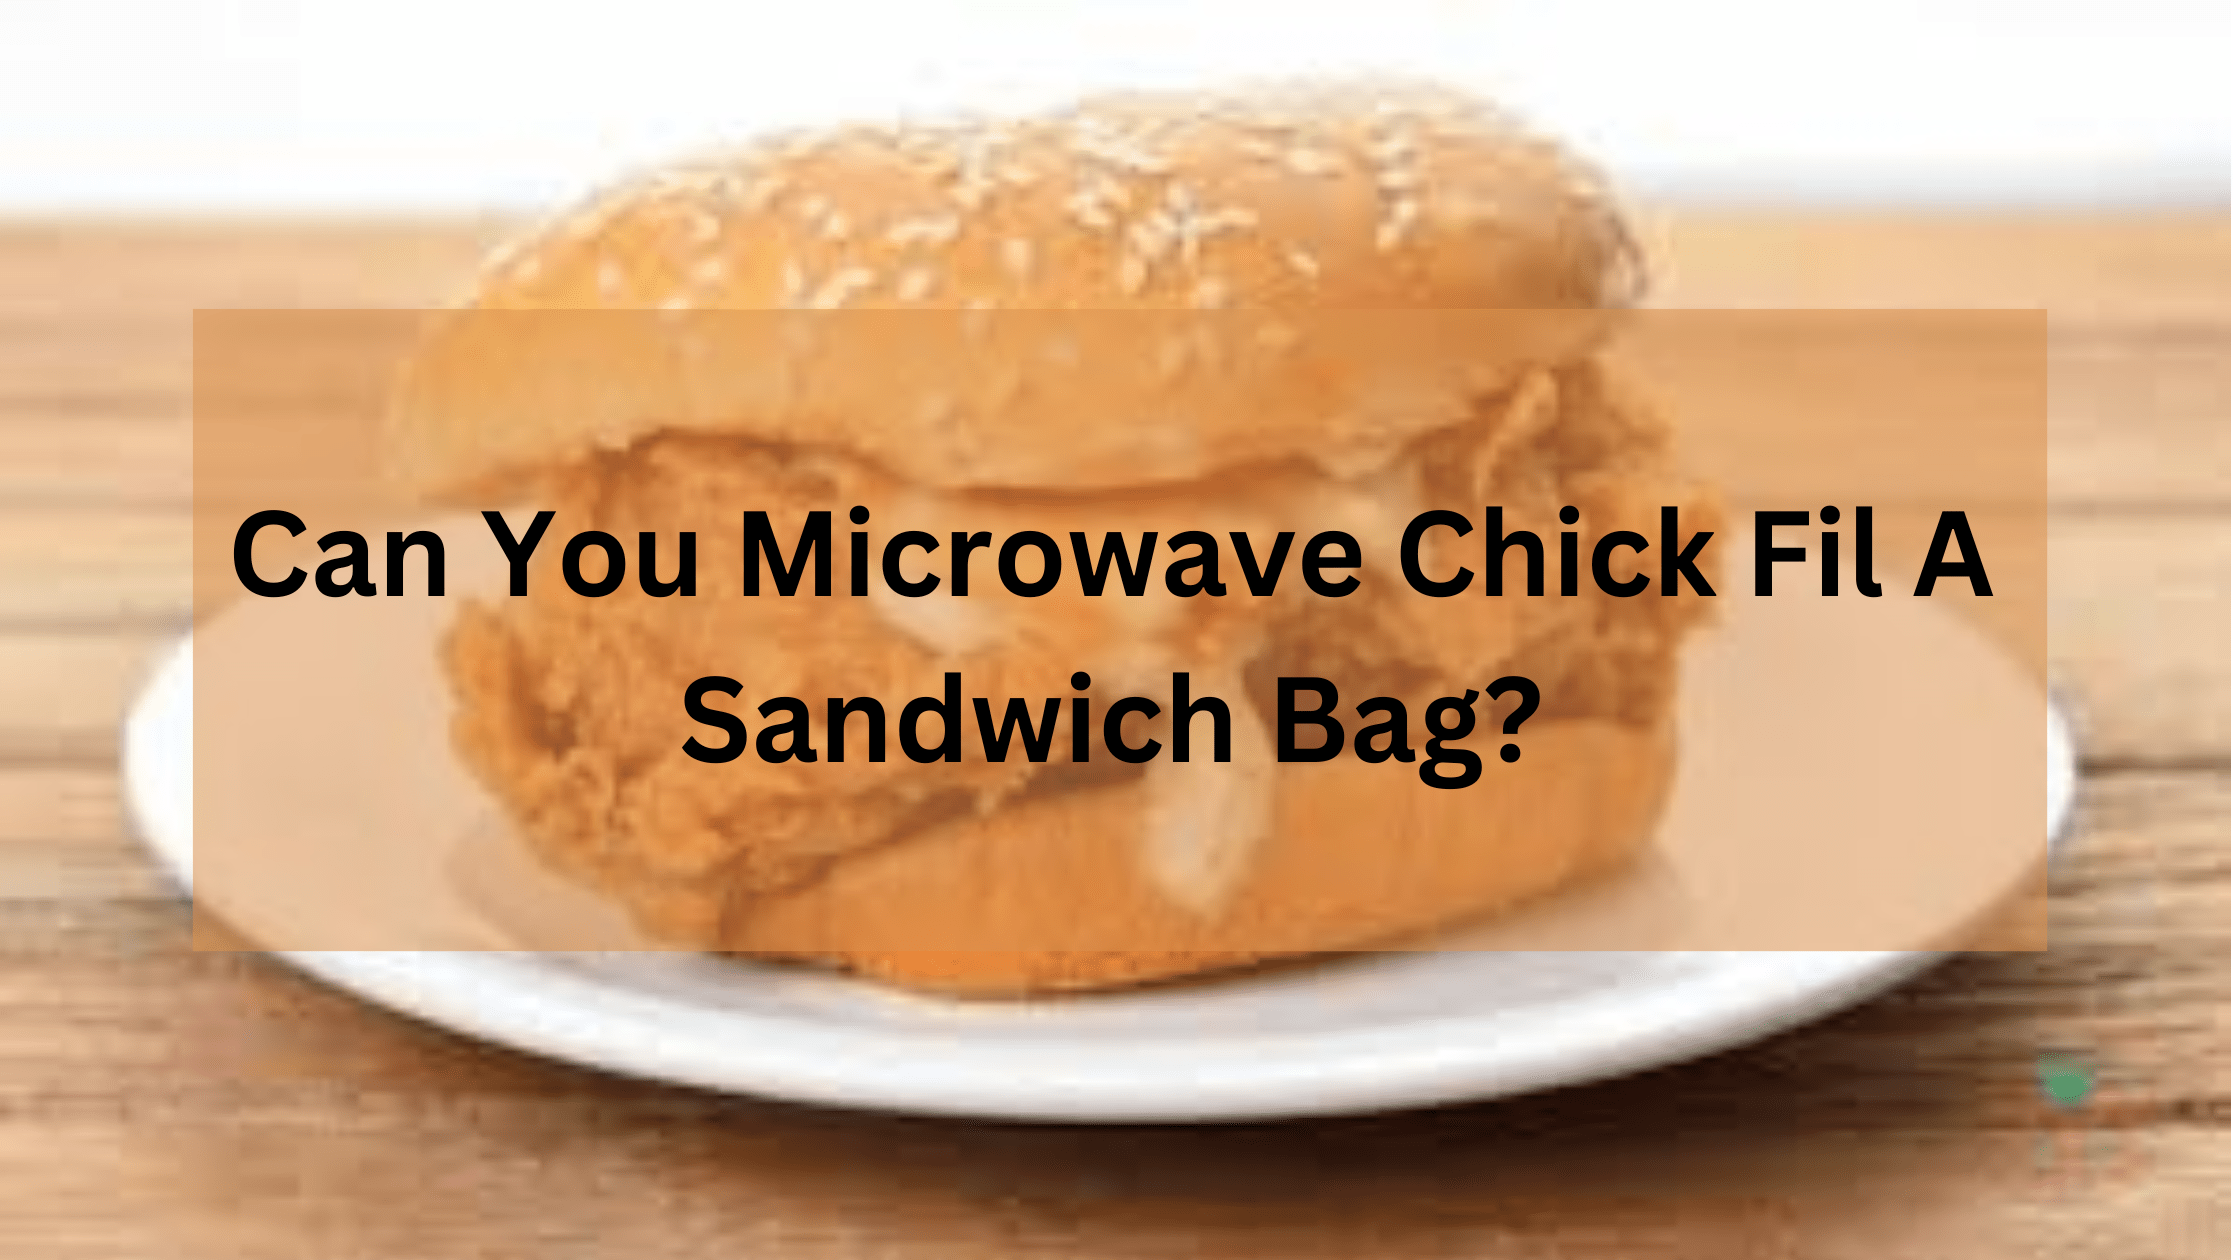 Can You Microwave Chick Fil A Sandwich Bag?